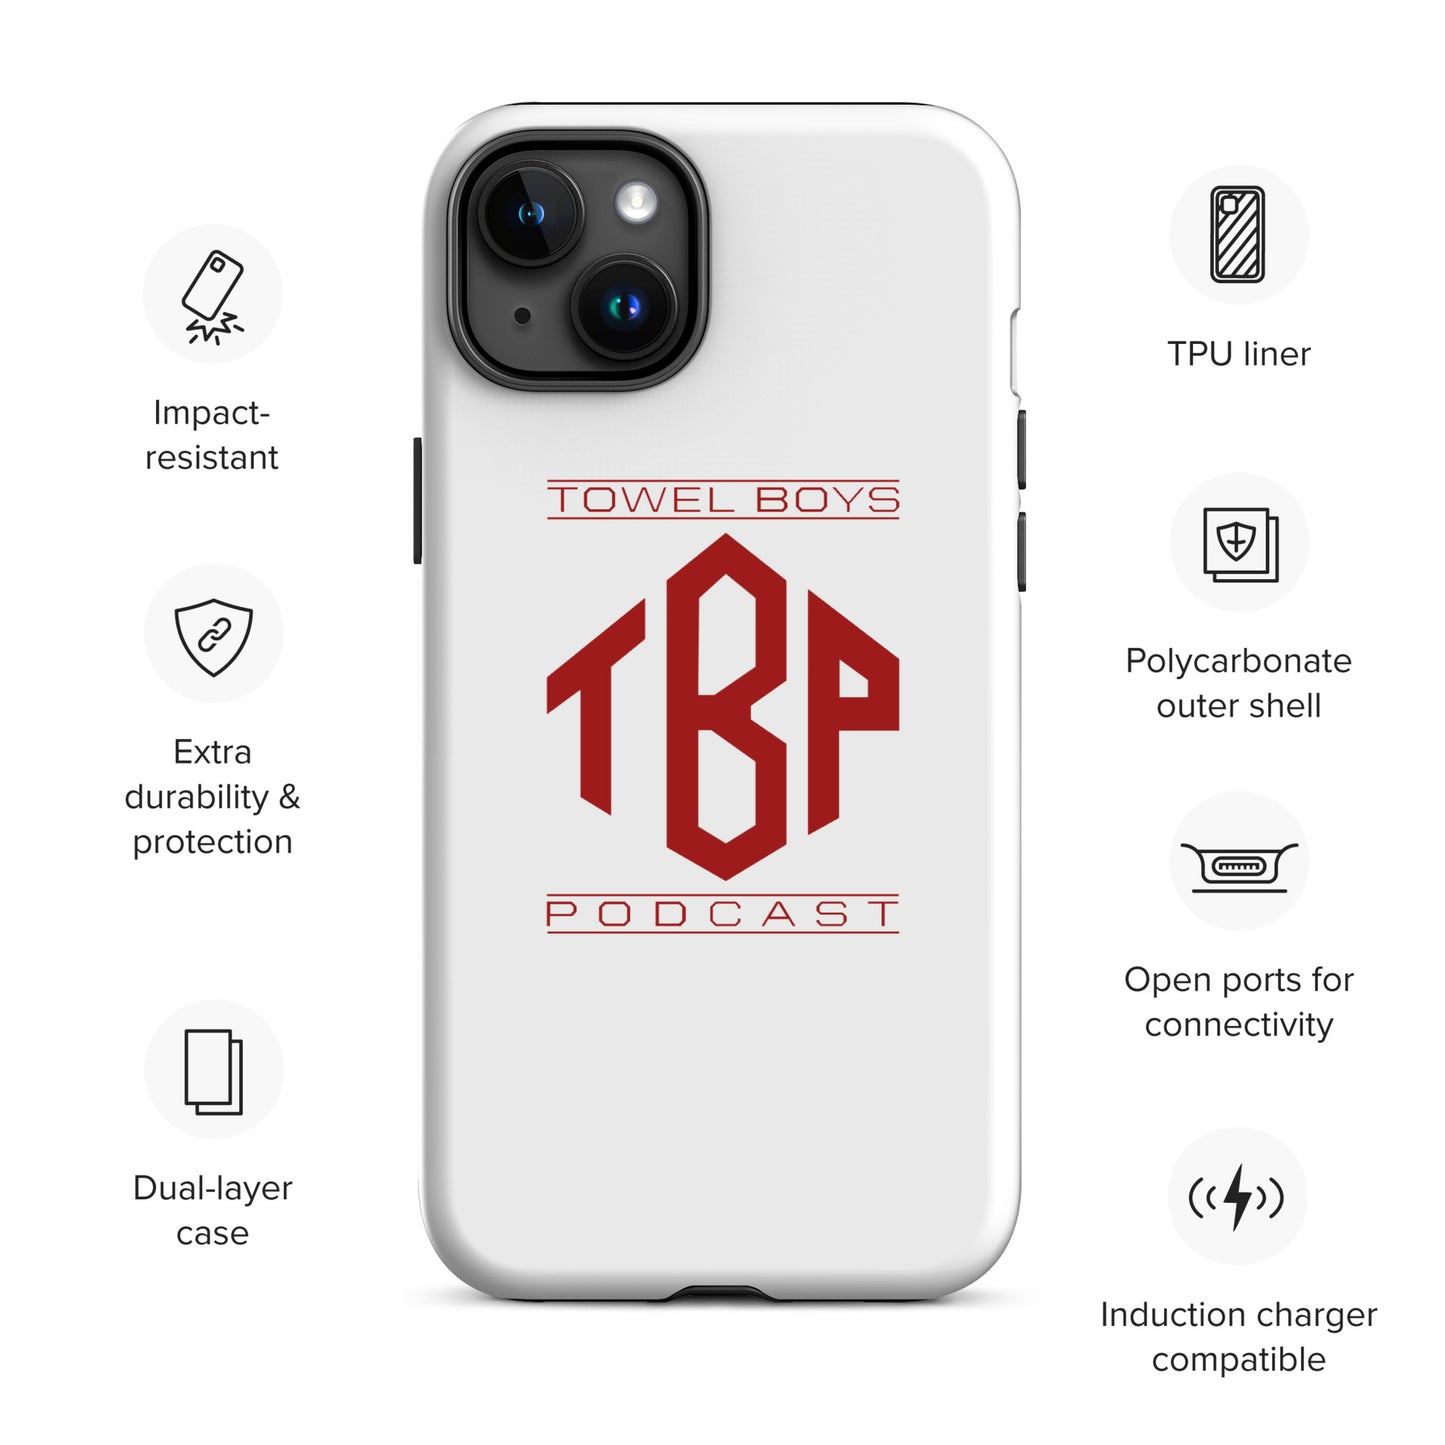 Towel Boys Podcast - Tough Case for iPhone